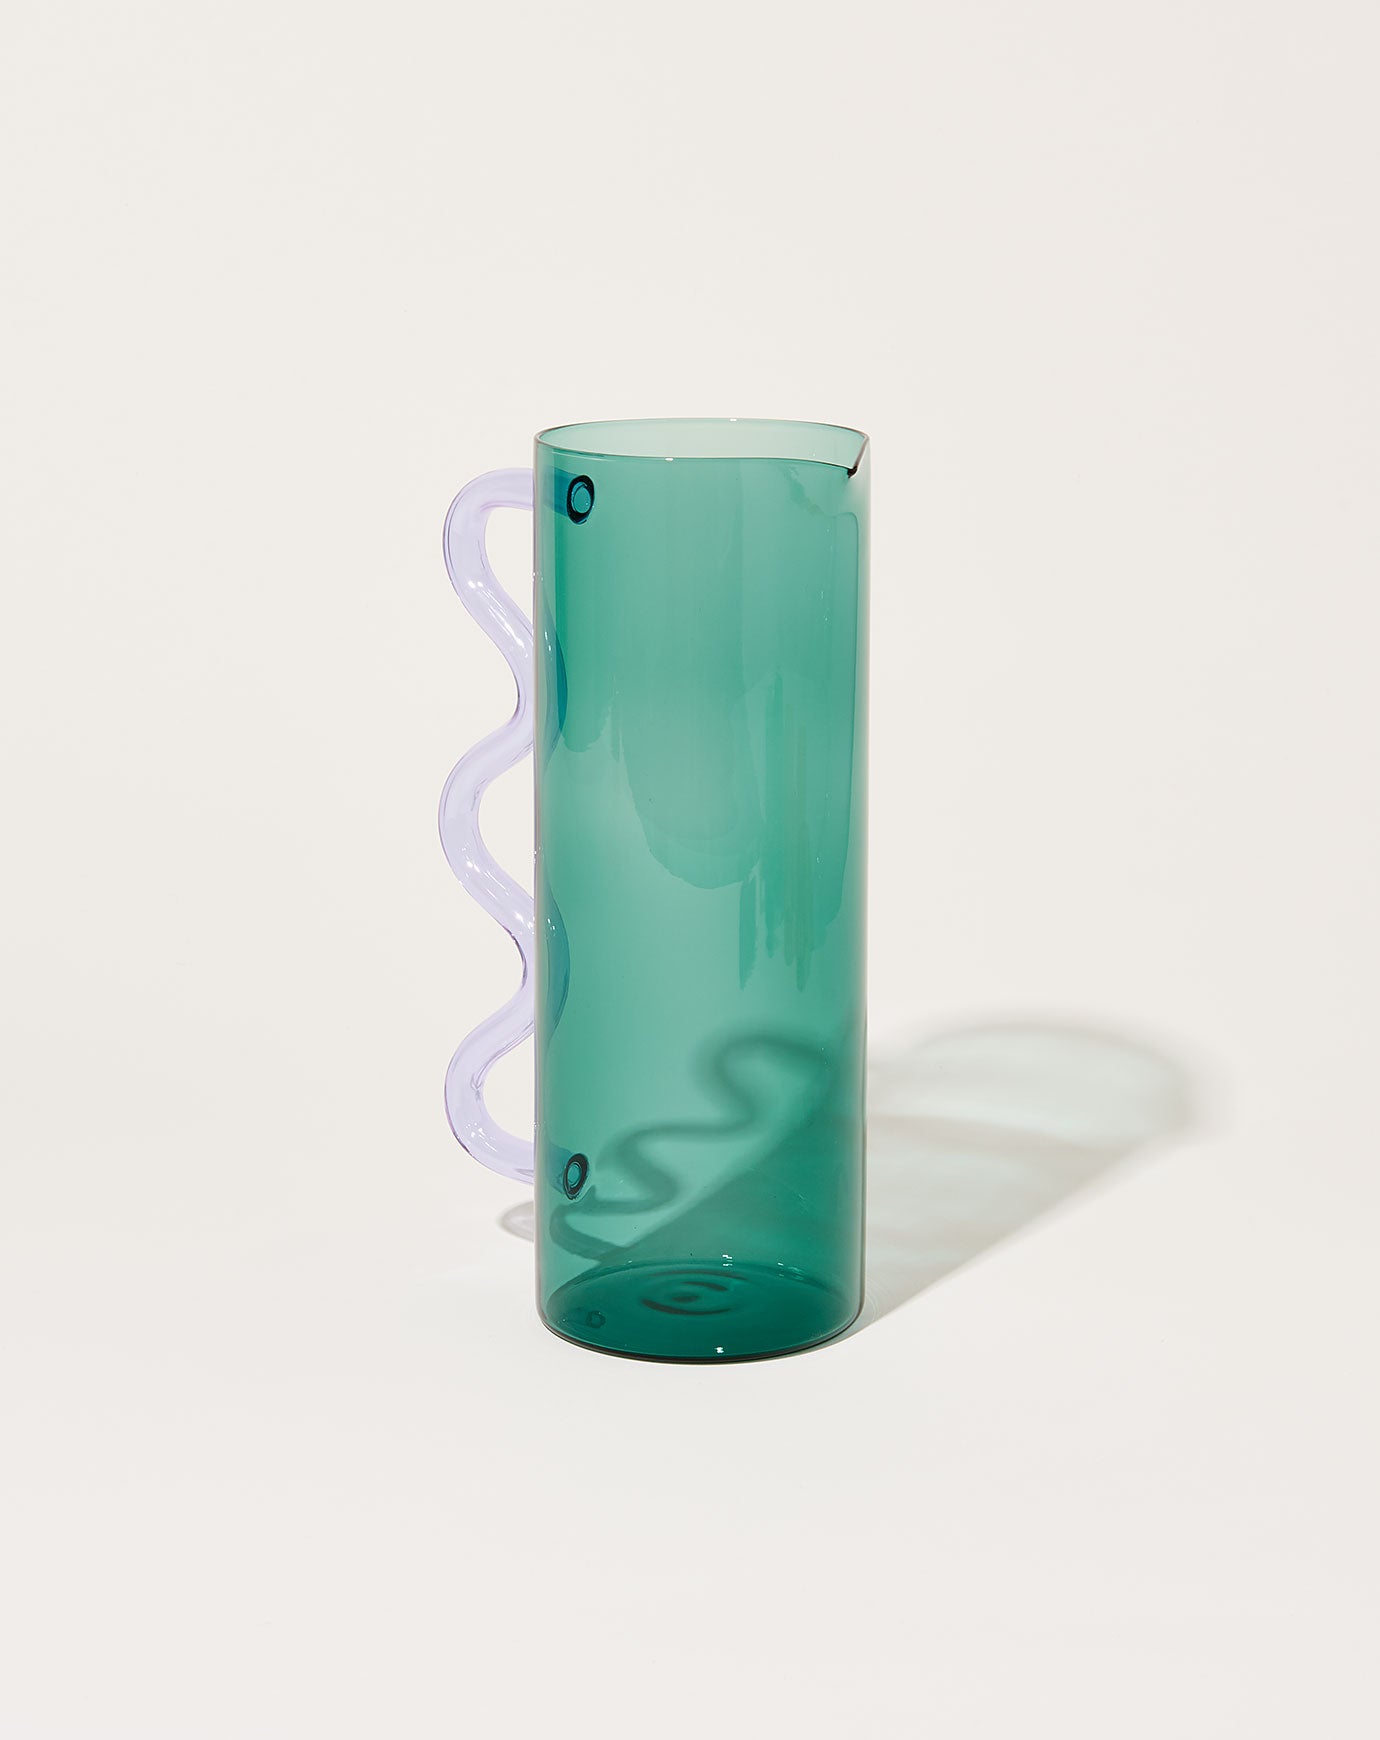 Sophie Lou Jacobsen Wave Pitcher in Teal with Lilac